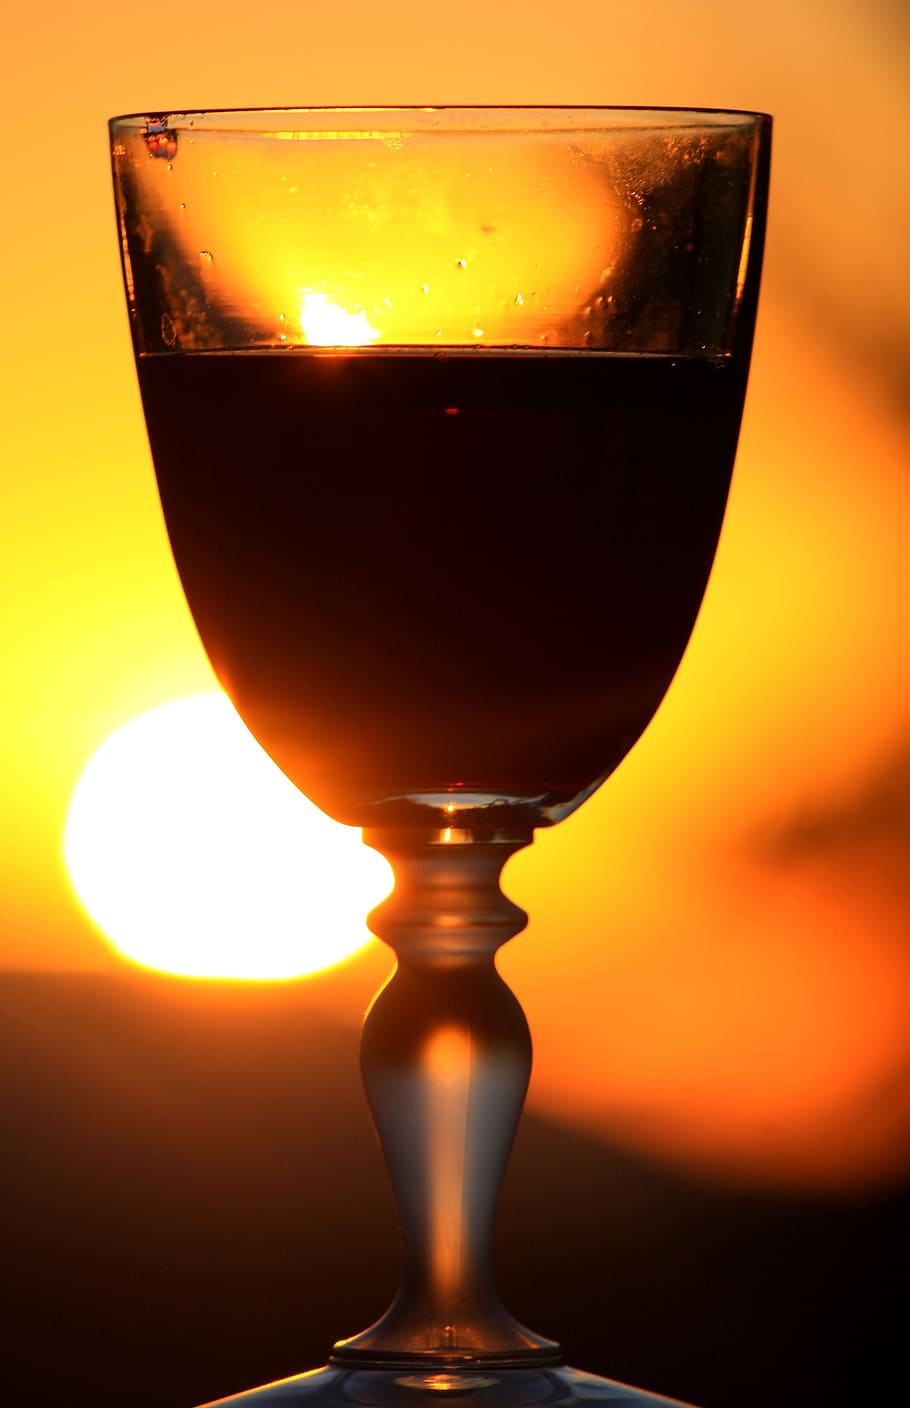 red wine, glass, wine, drink, alcohol, sunset, wanderlust, holiday, sun, relax